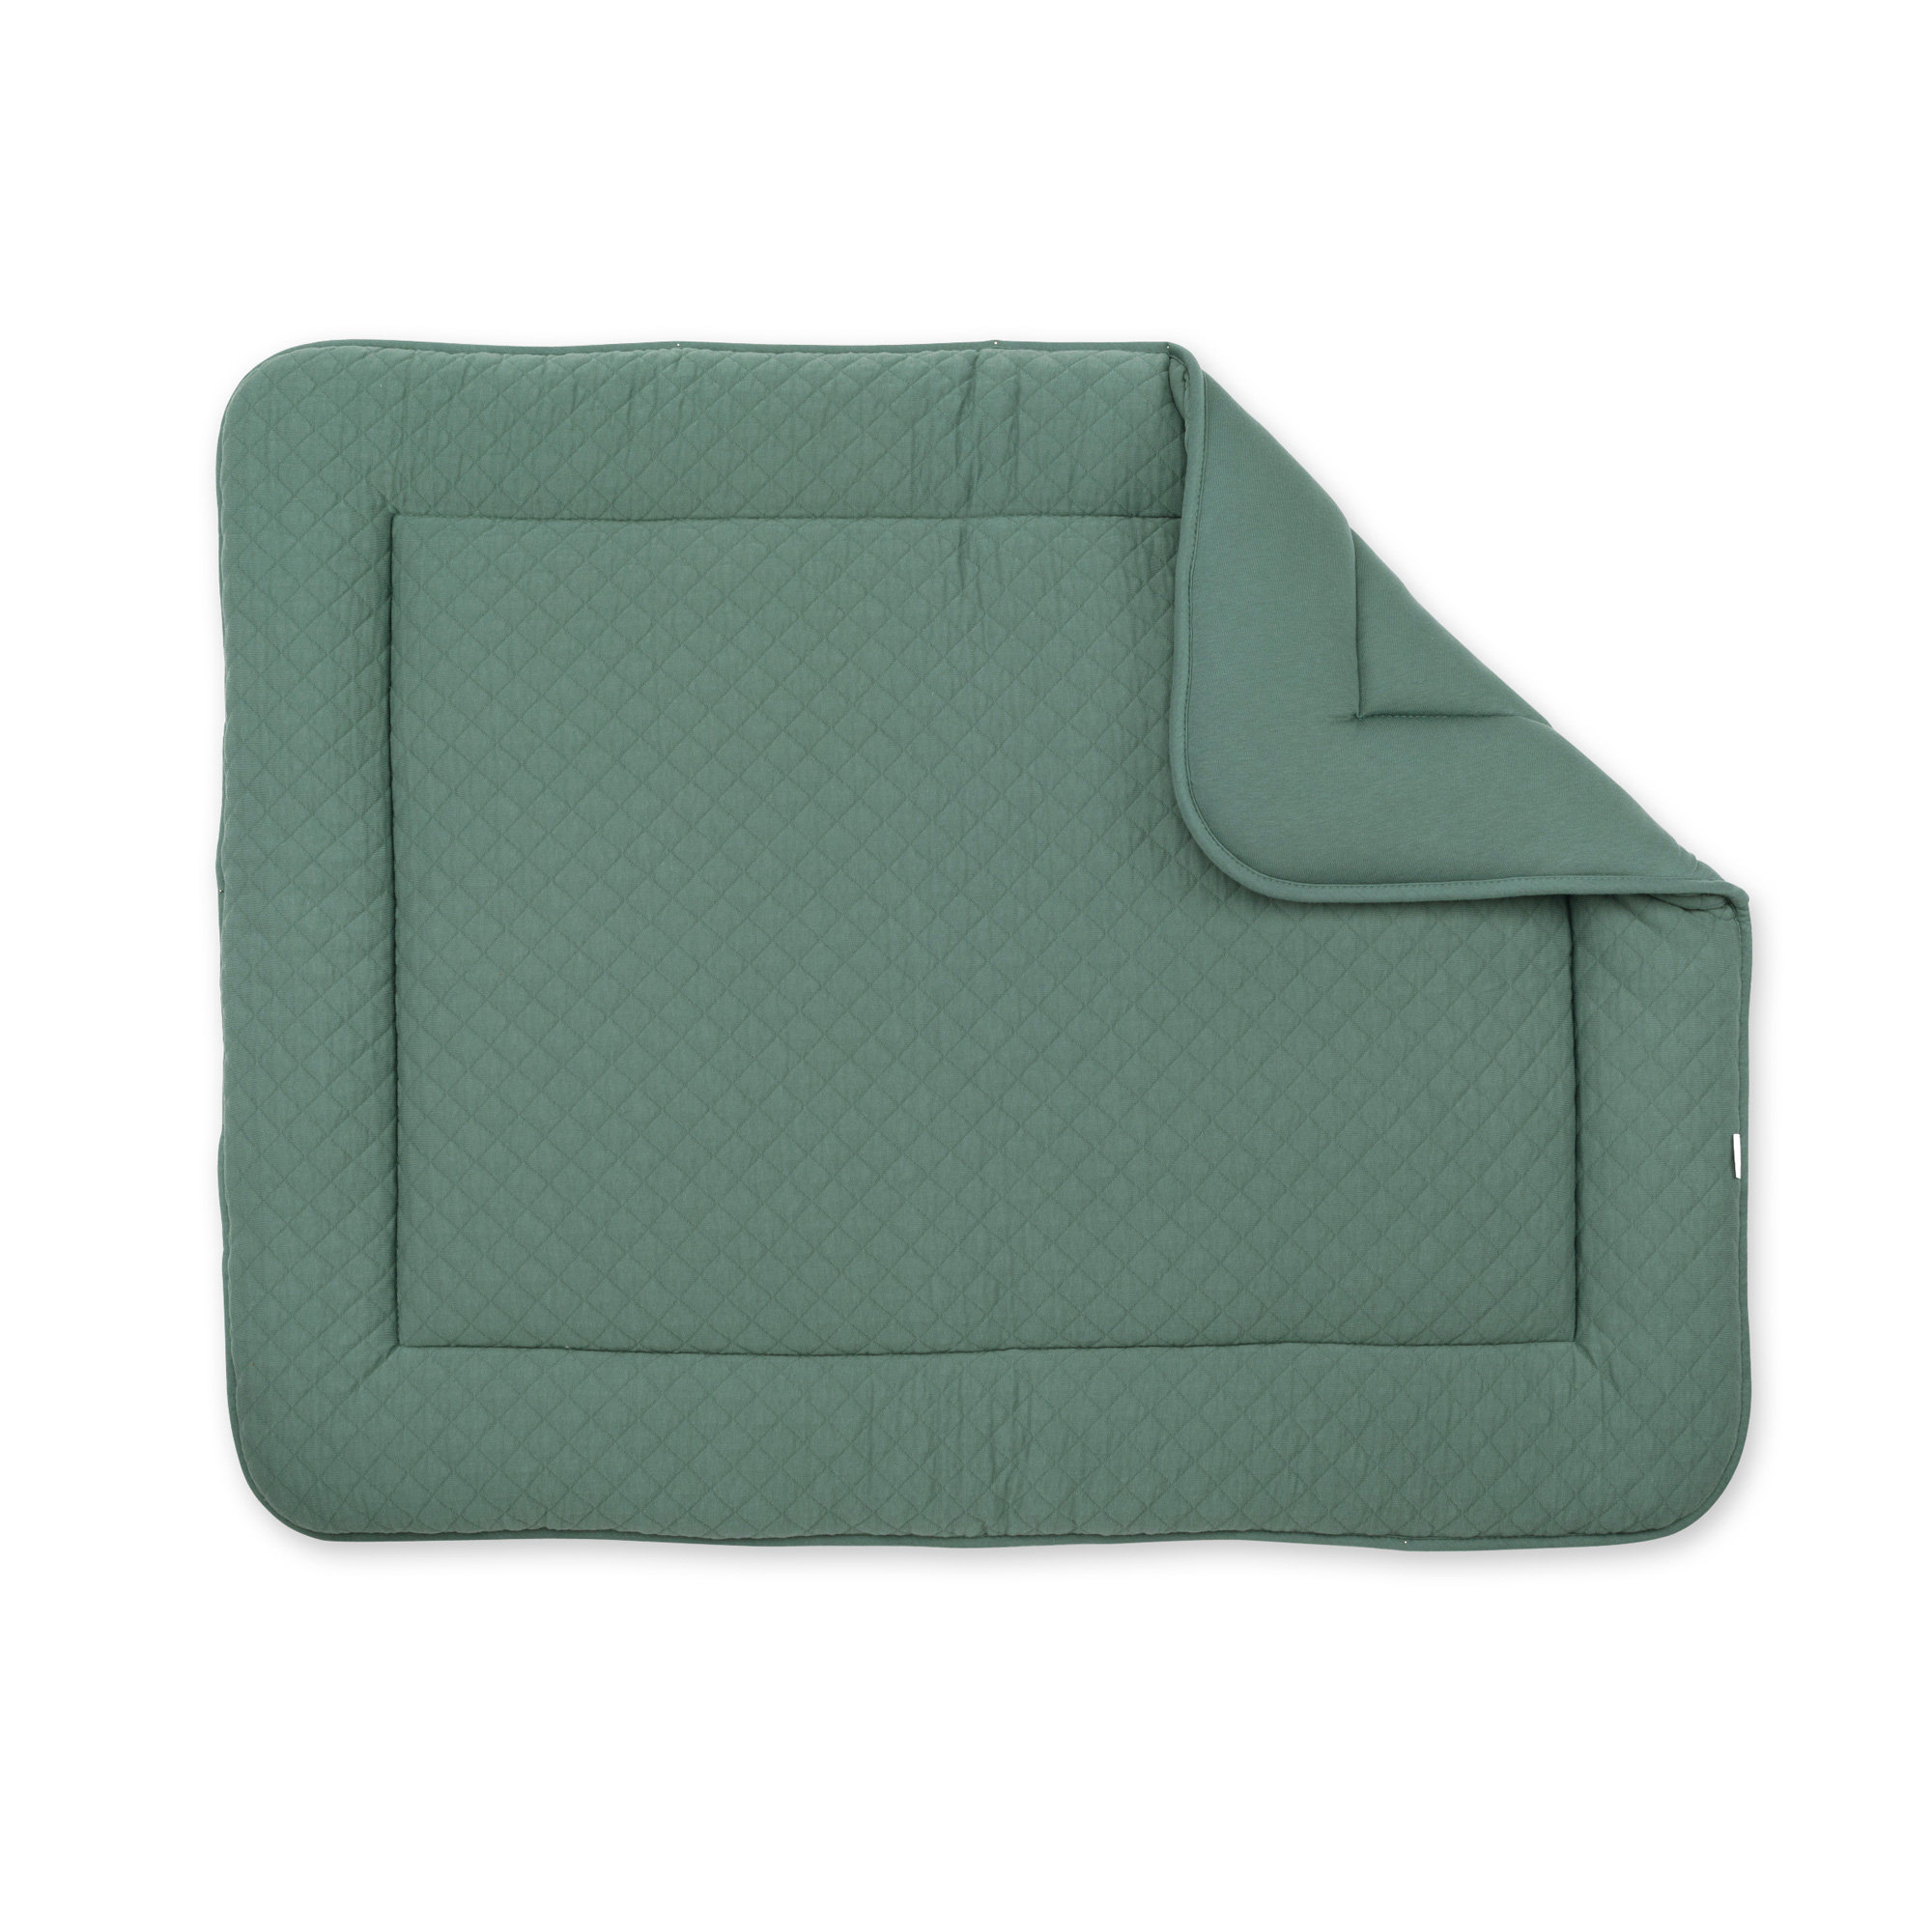 Parklegger Pady quilted 75x95cm QUILT Green